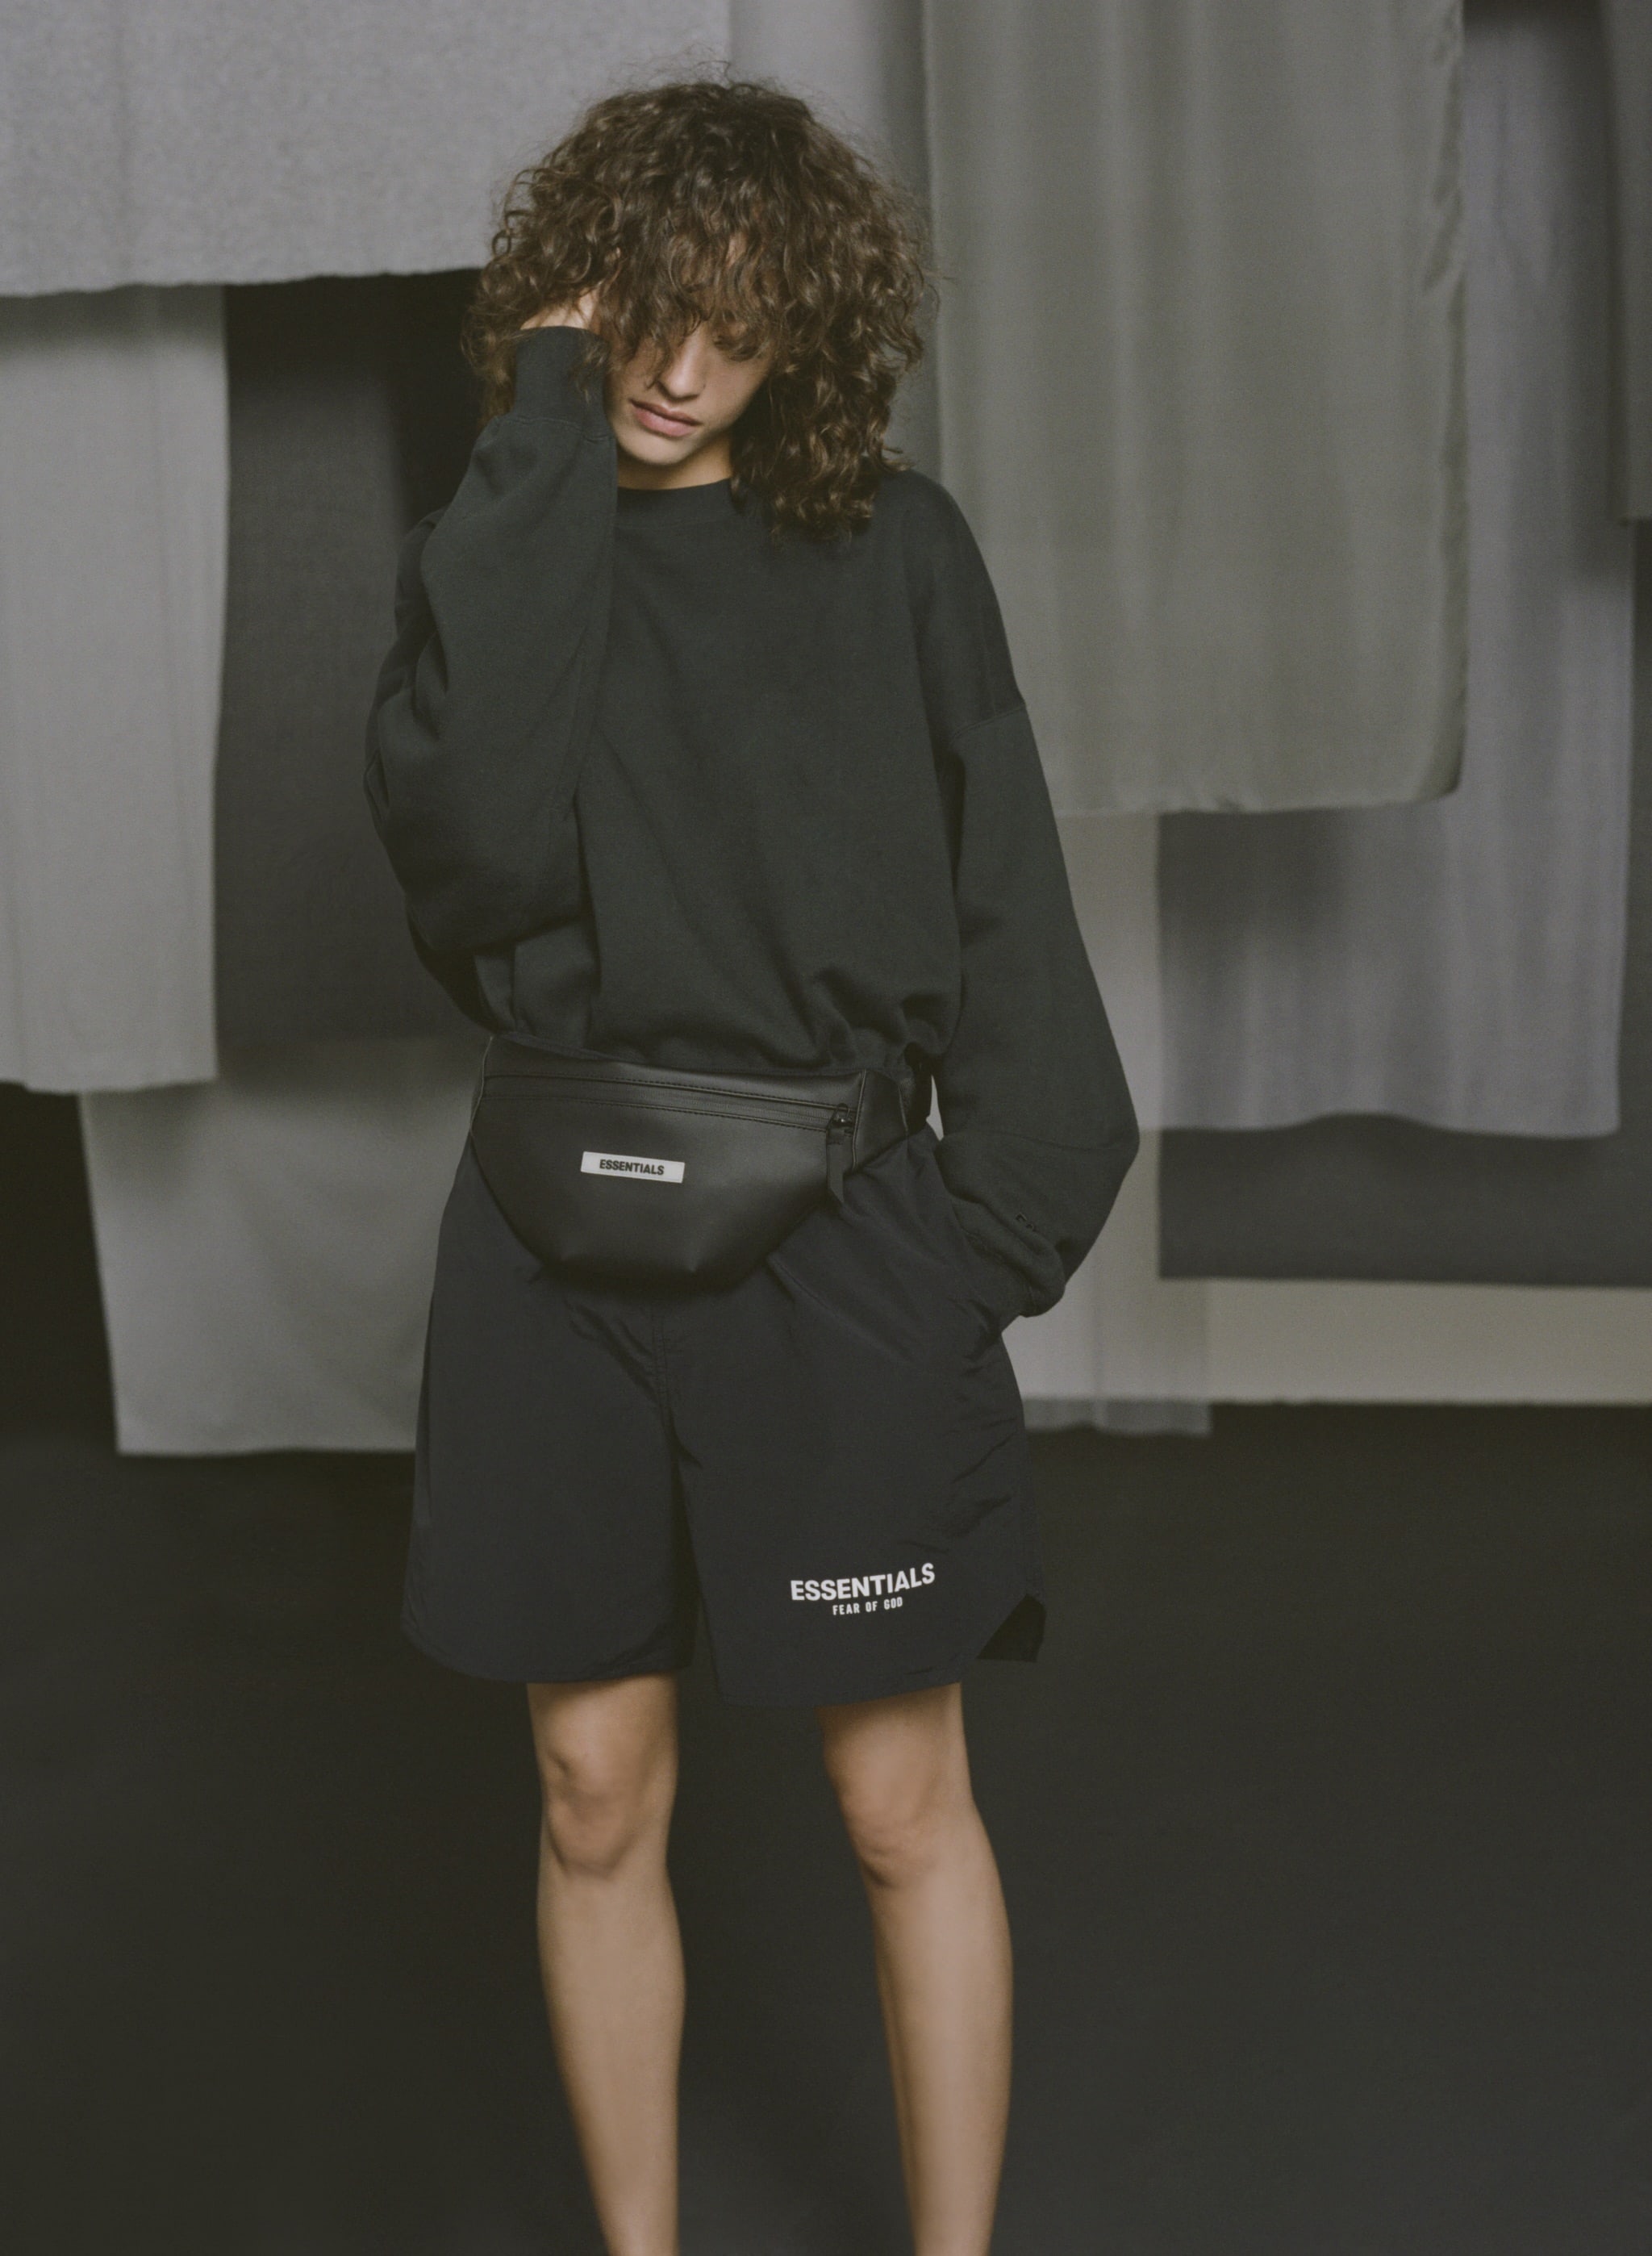 fear-of-god-essentials-collection-fall-2019 (5)